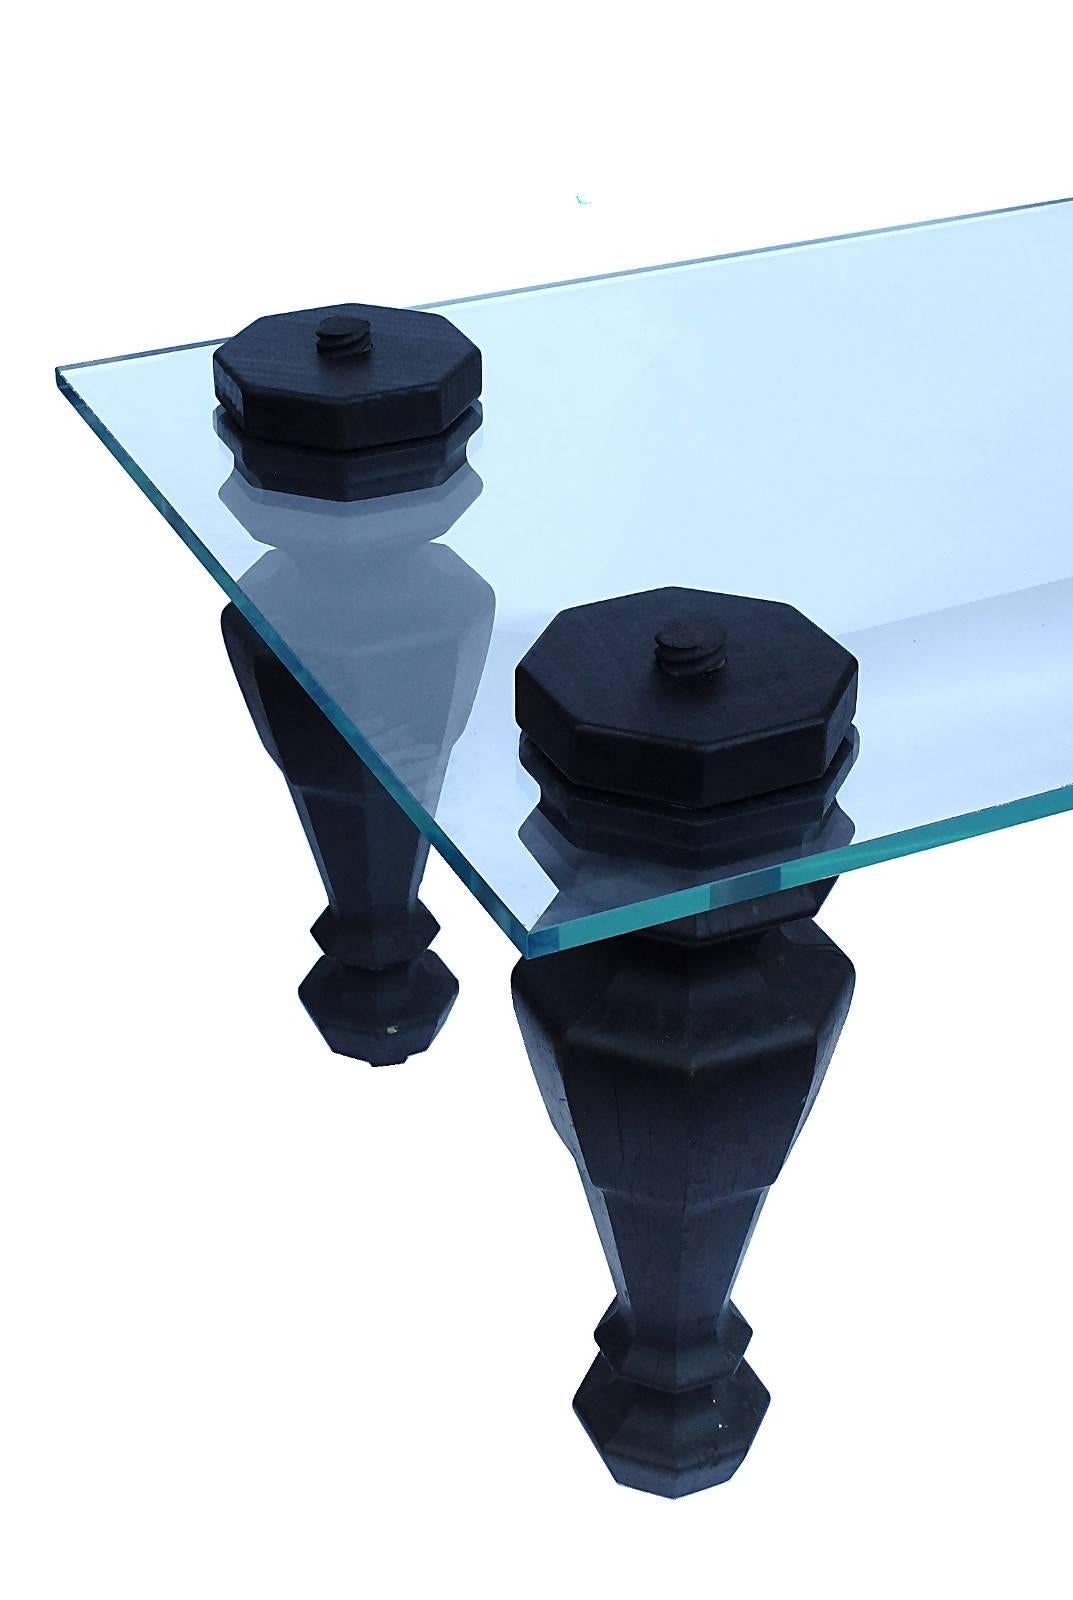 A fine example of reinterpretation and reutilization of an antique elements A four wooden grande piano legs with wheels have been reused as a big rectangular coffee table with a glass top.